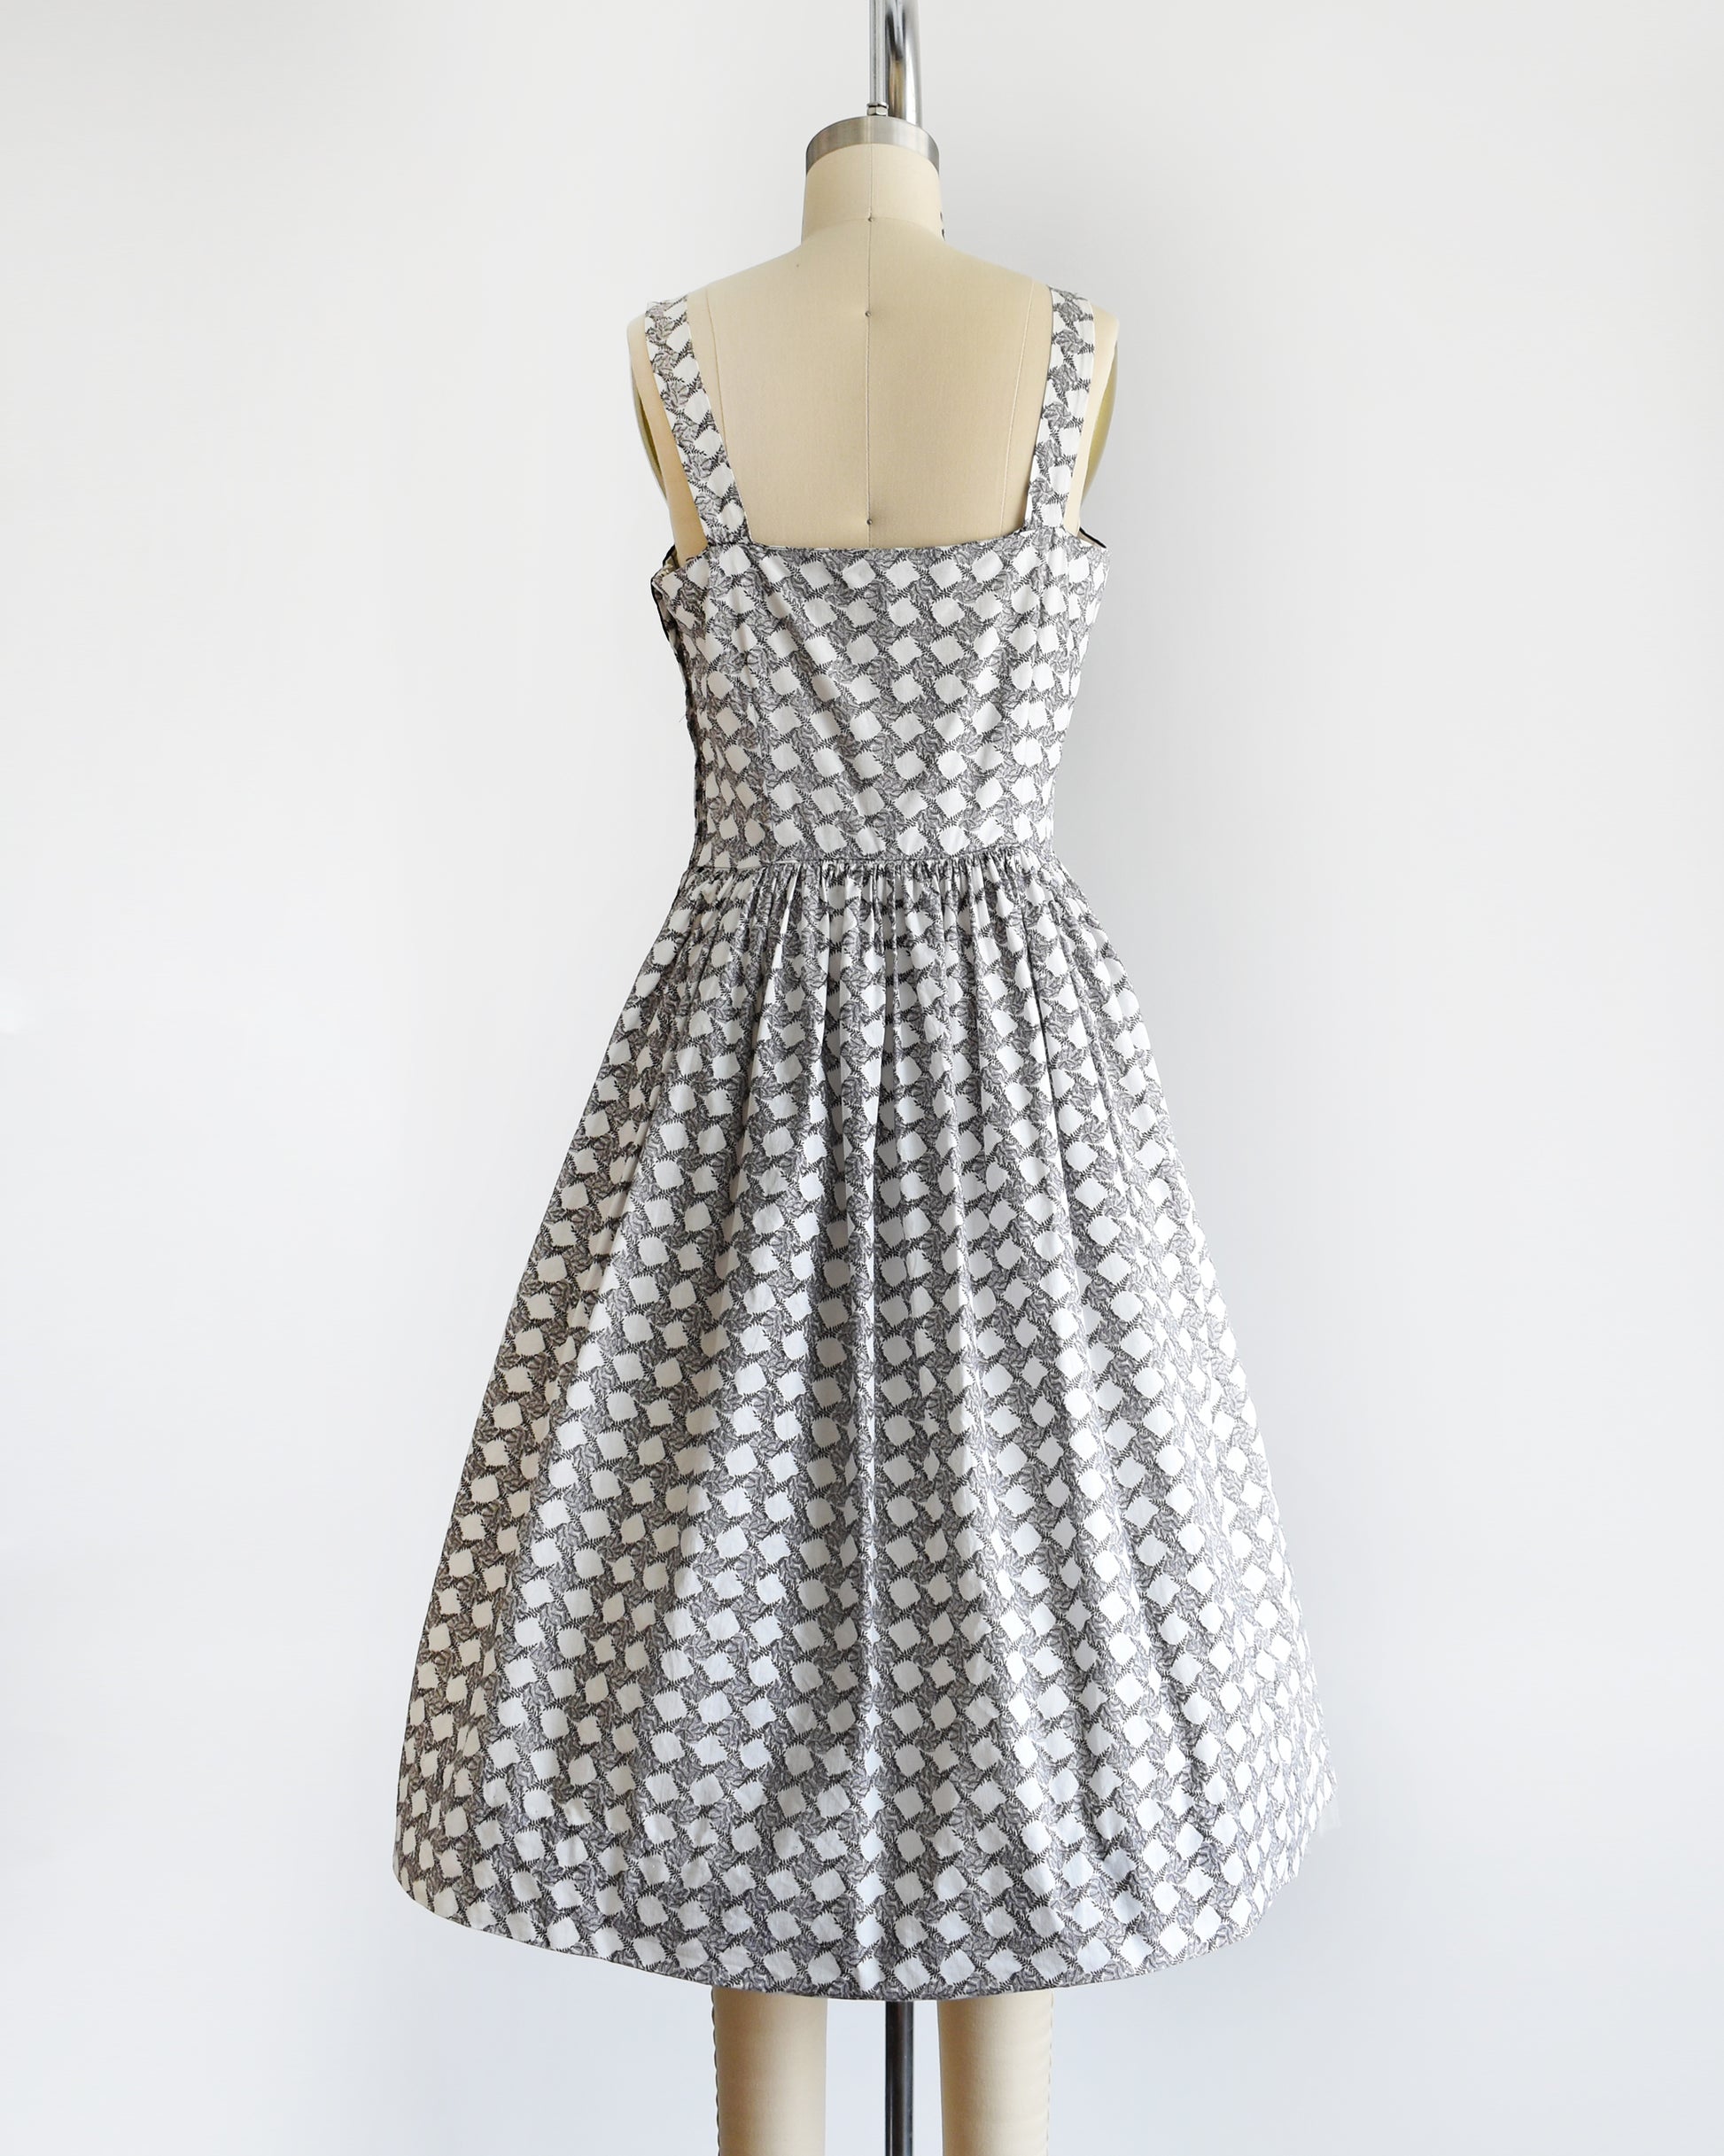 Back view of a vintage 1950s white dress with a  black fern motif that forms a diamond print. The dress has a black scalloped neckline and fit and flare skirt.